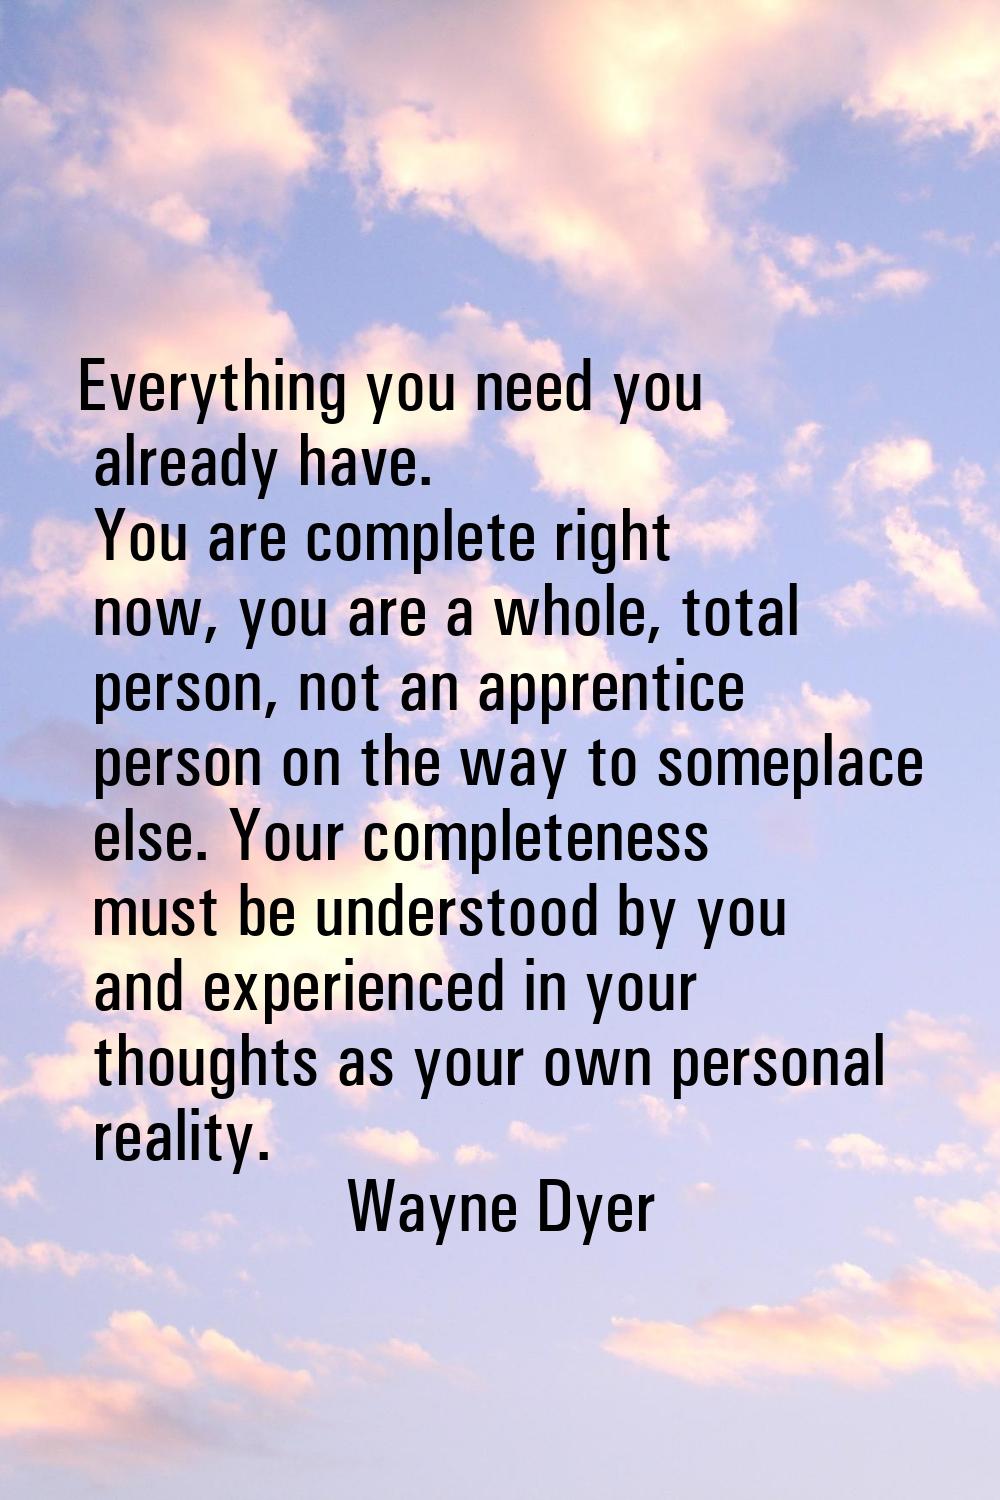 Everything you need you already have. You are complete right now, you are a whole, total person, no